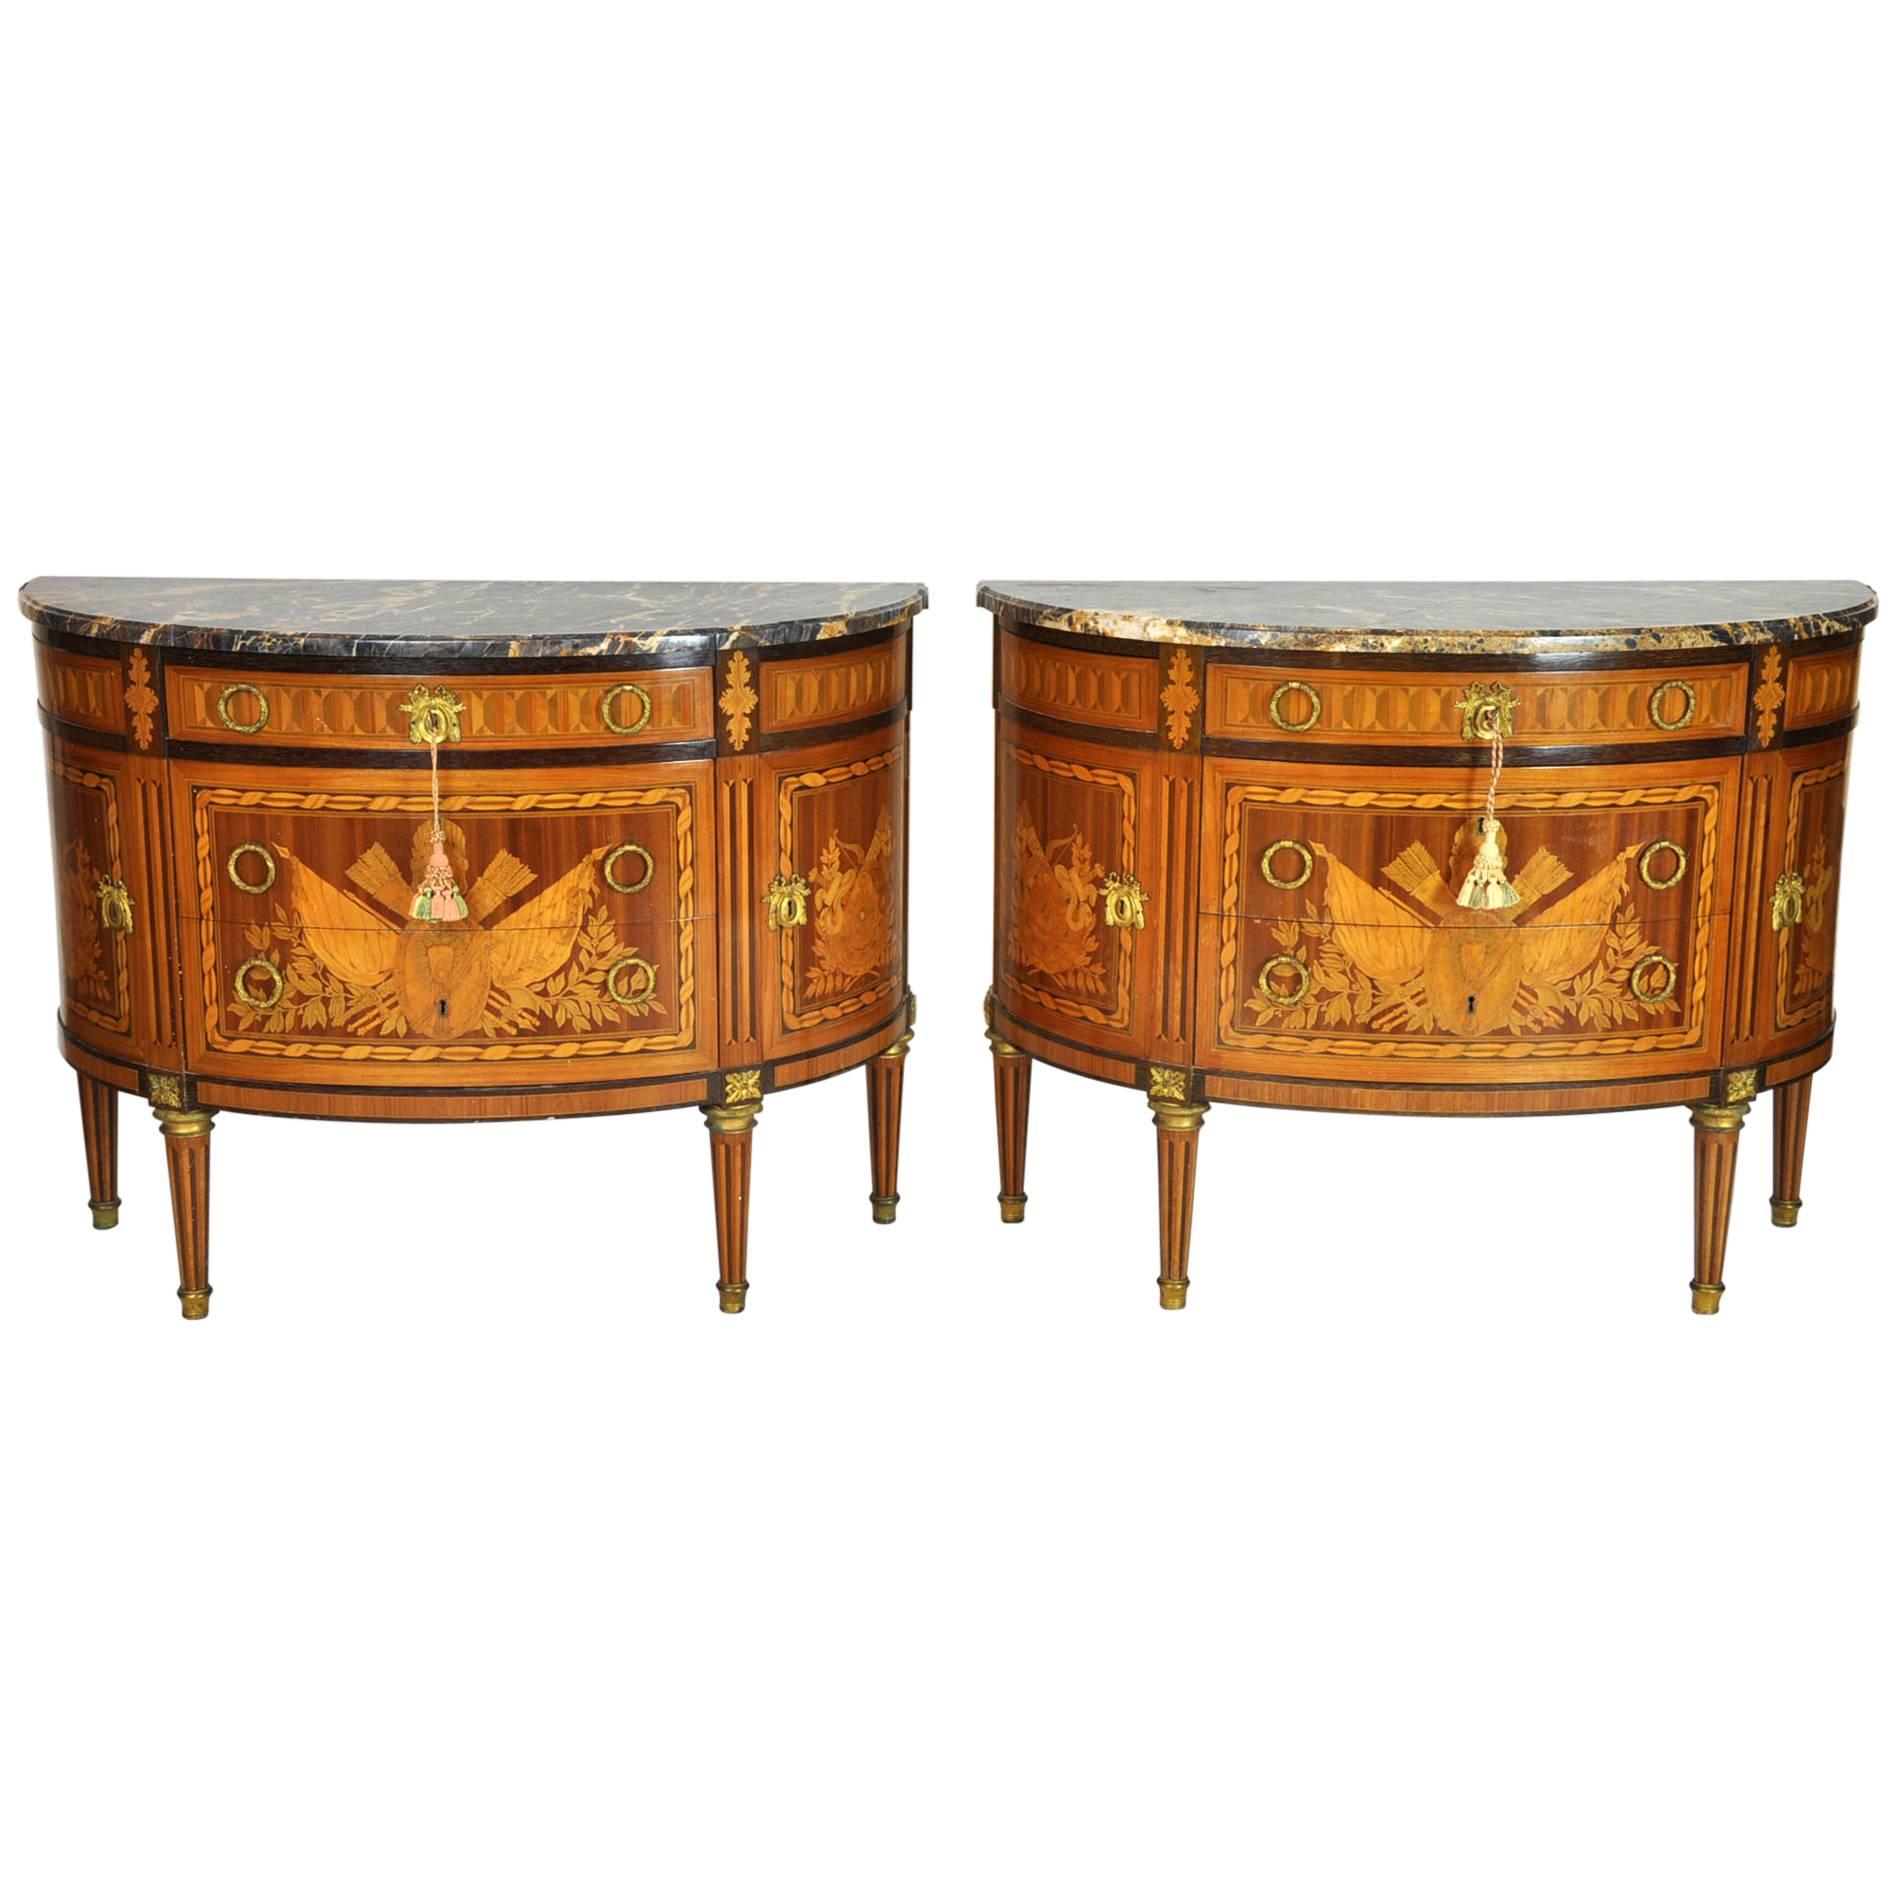 Pair of Portuguese Marble-Top Louis XVI Style Demilune Cabinets